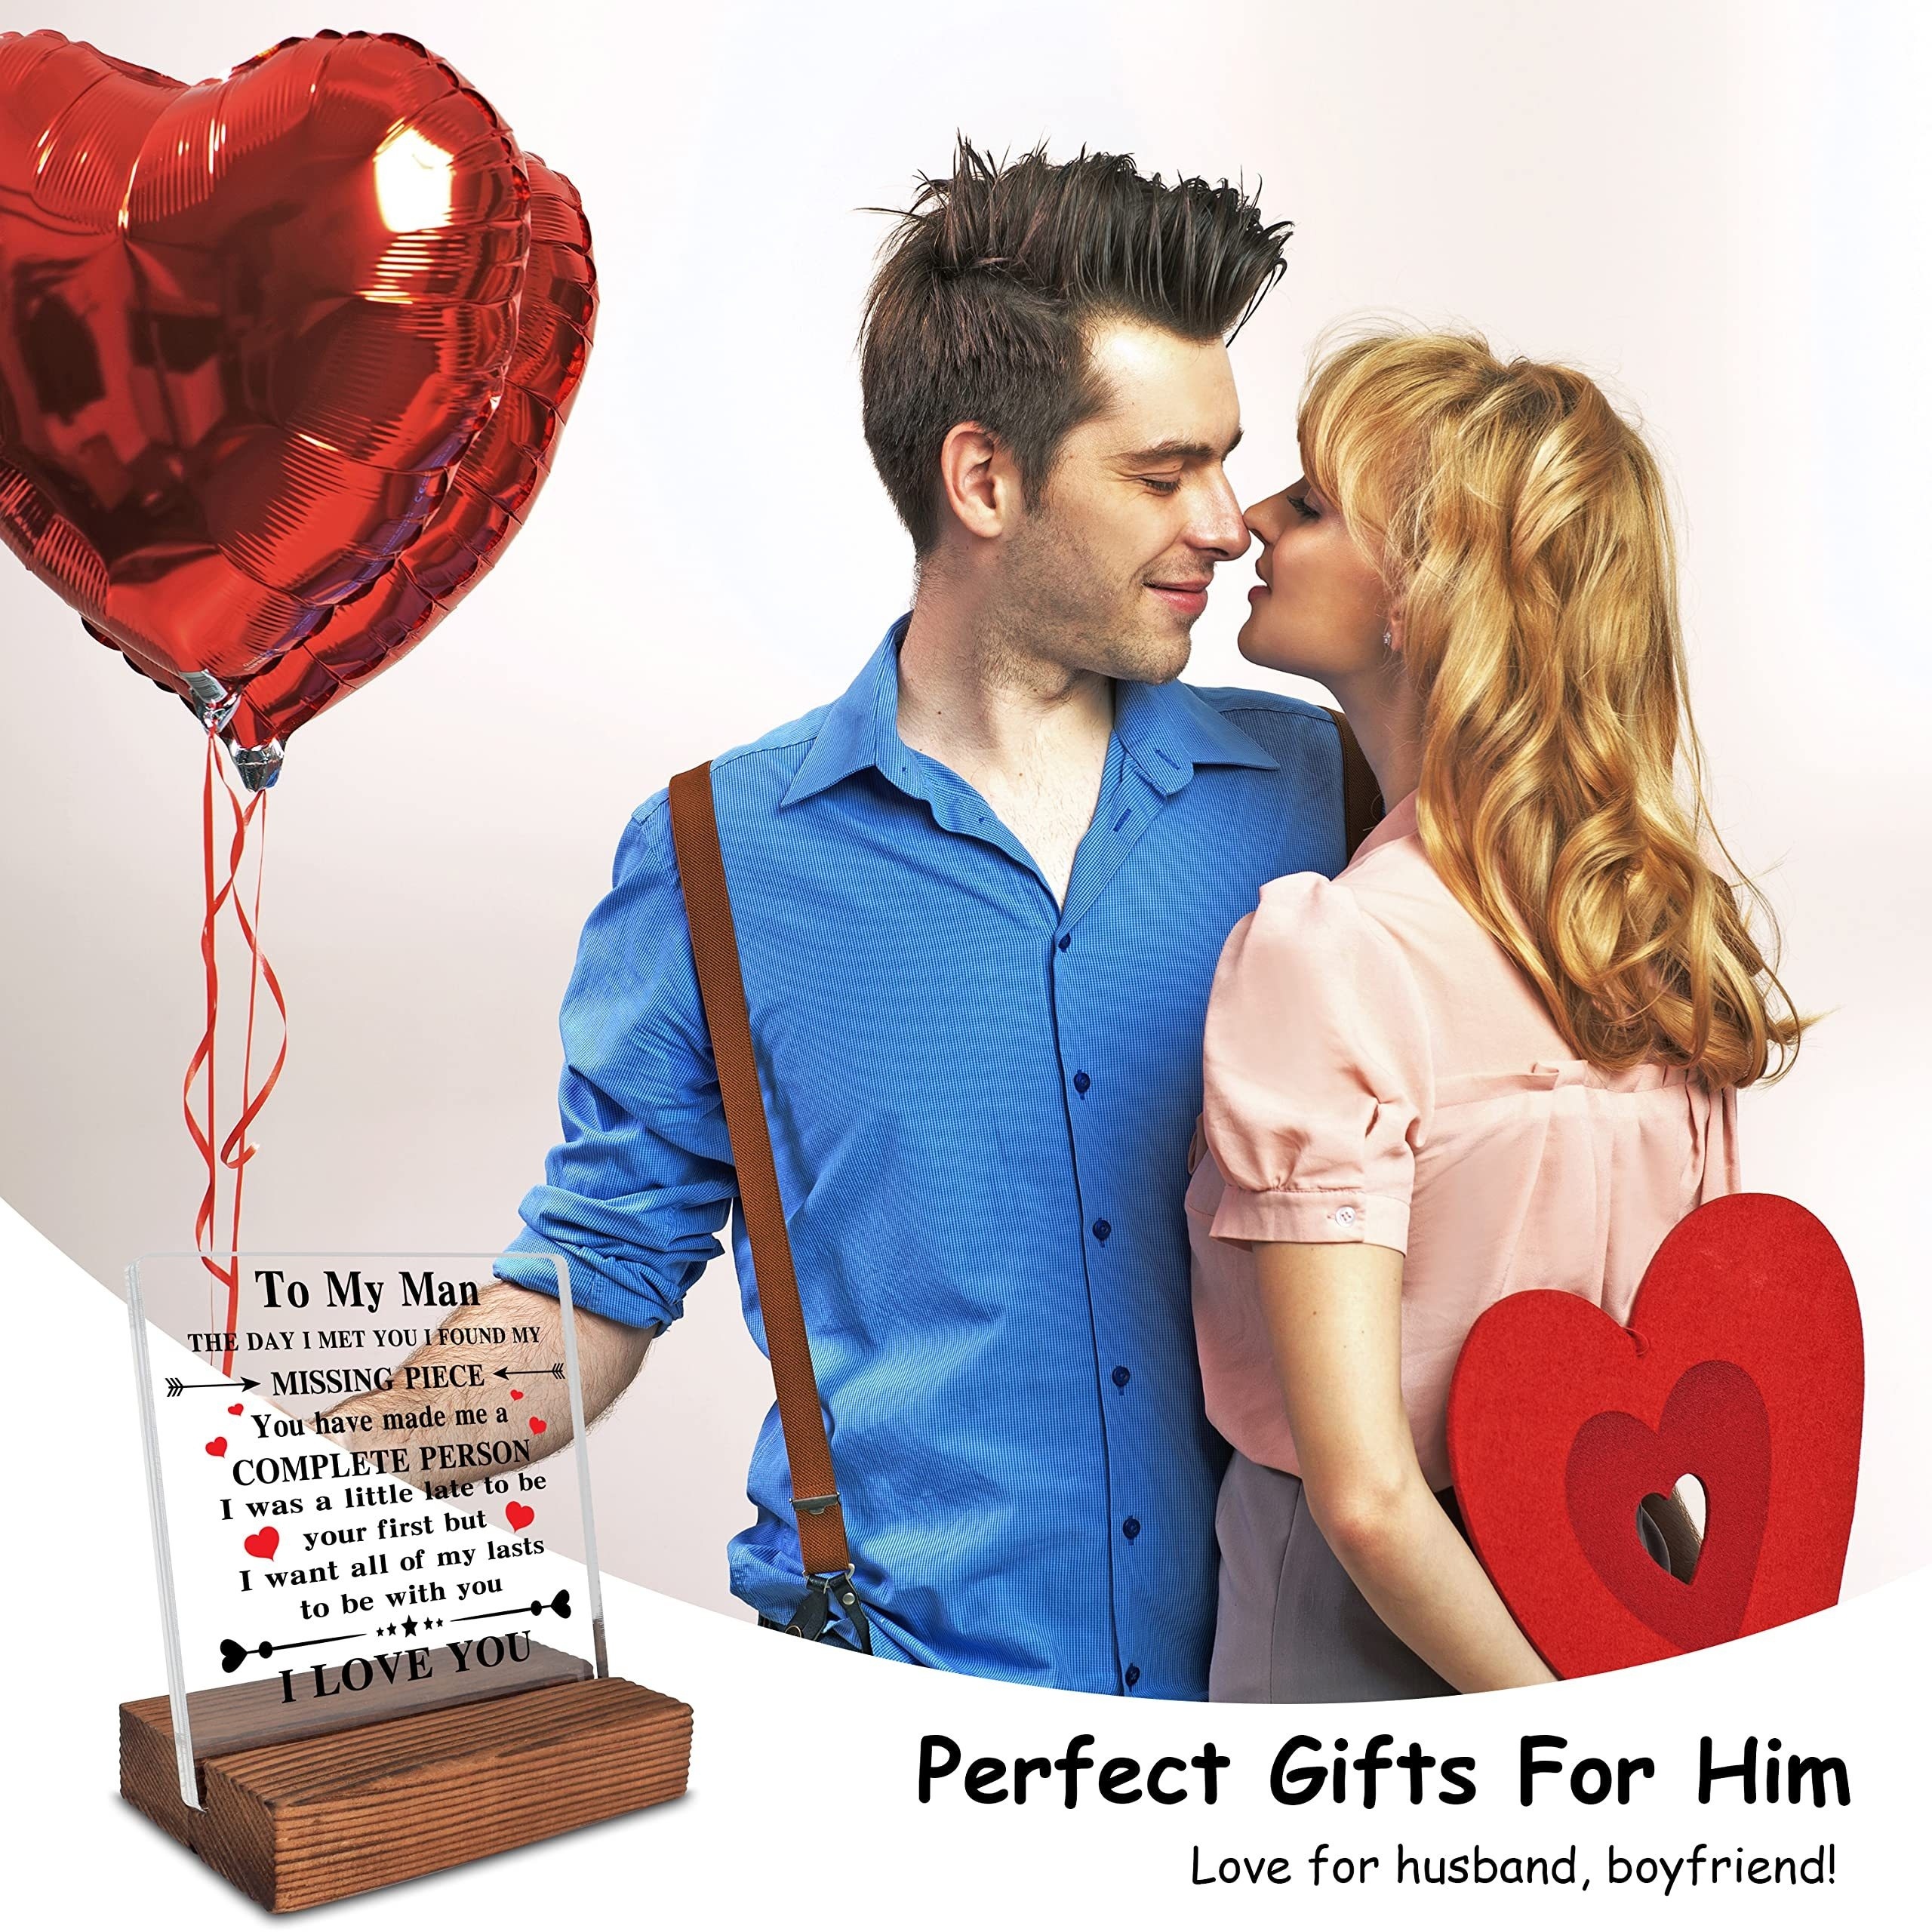 Valentine's Day Gifts for Him/Her Husband Wives - Personalized Gifts for  Boyfriend/Girlfriend - Romantic Gifts Sentimental Gifts Birthday Wedding